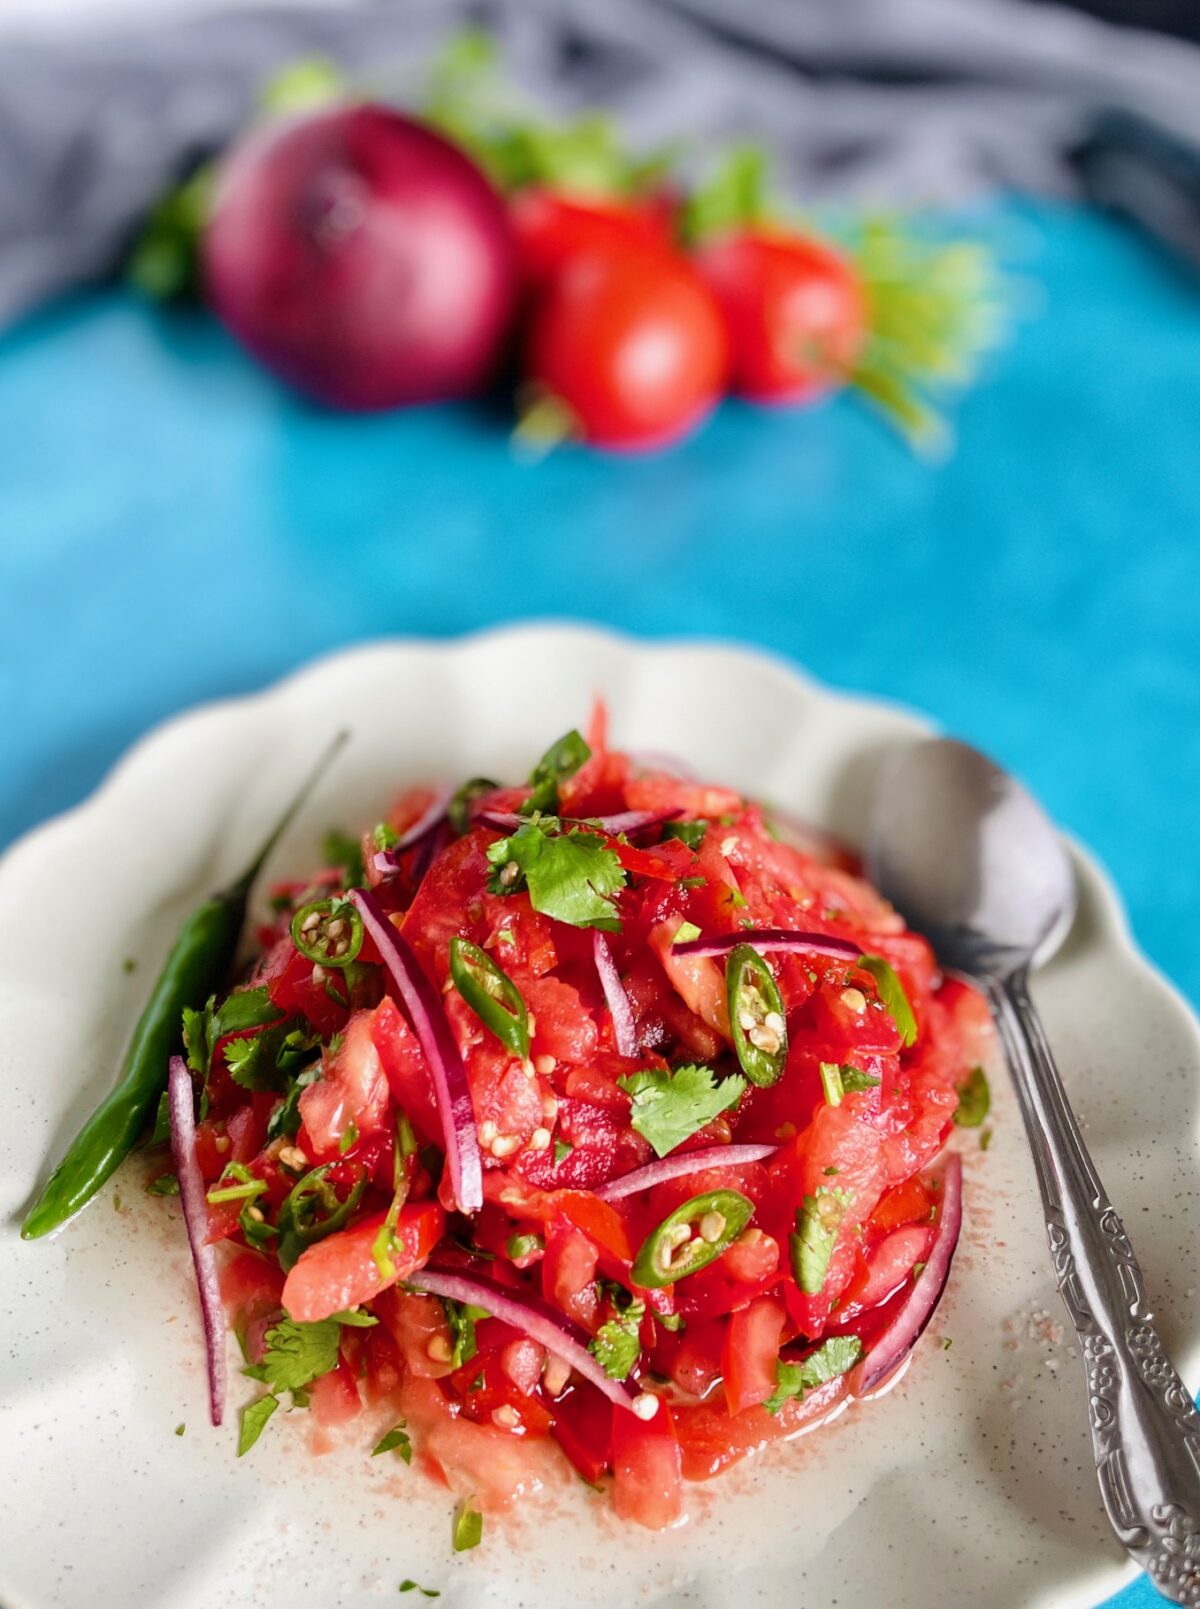 Mauritian tomato chutney with a whole green chili, sliced tomatoes, chopped green chilies, sliced red onion in a plate with scalloped edges. Spoon on the edge of the plate.